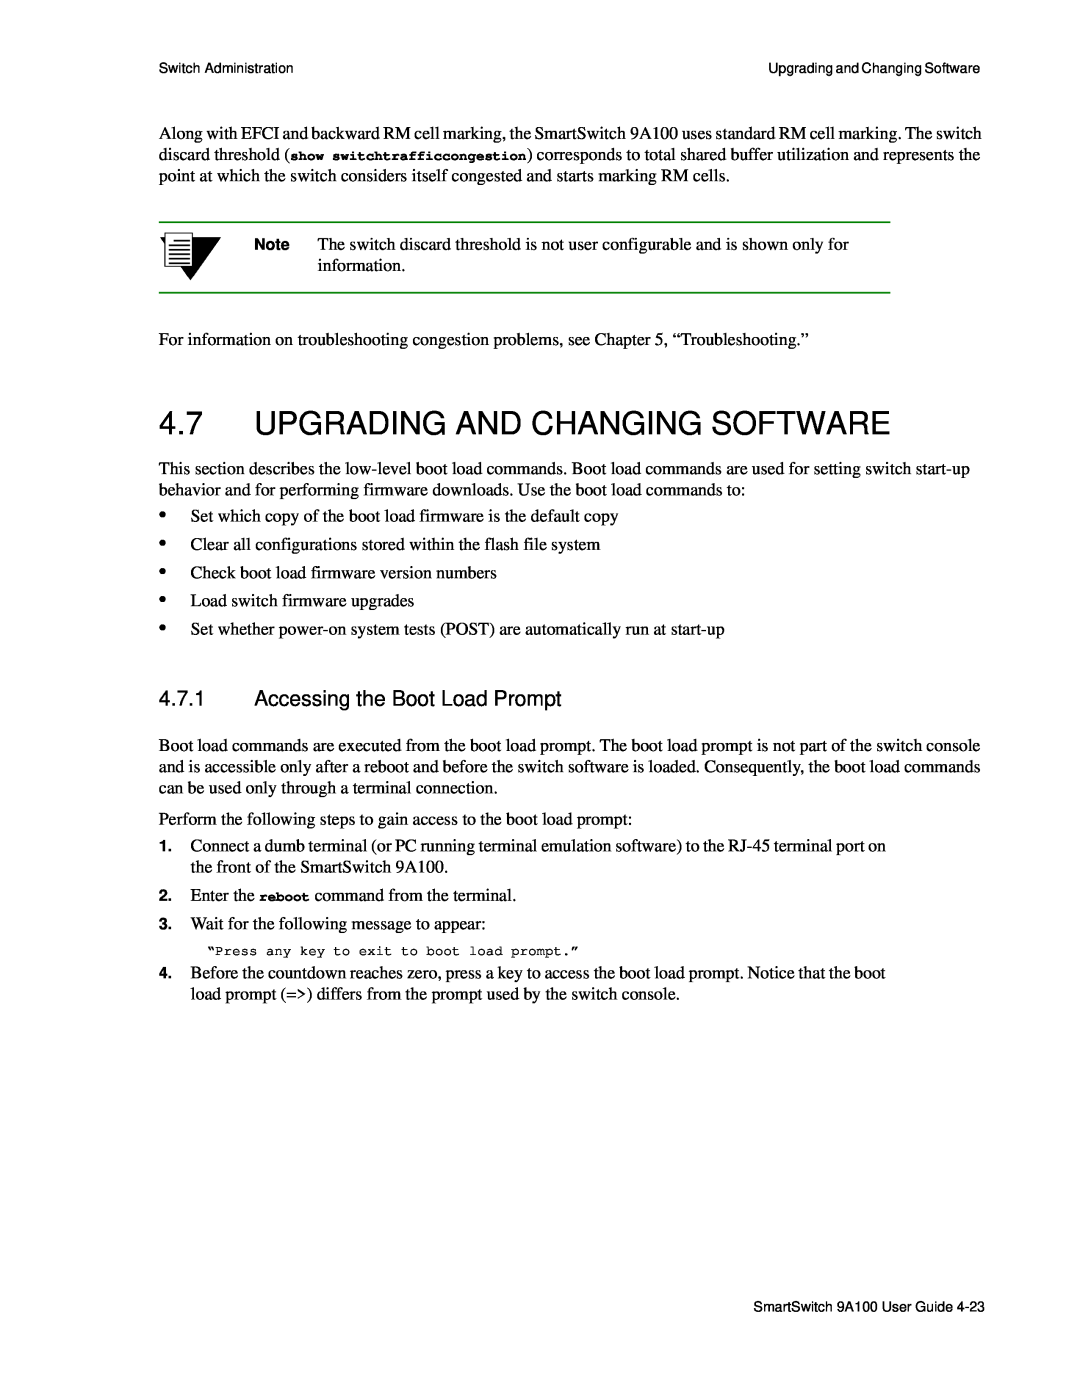 Cabletron Systems 9A100 manual Upgrading And Changing Software, Accessing the Boot Load Prompt 